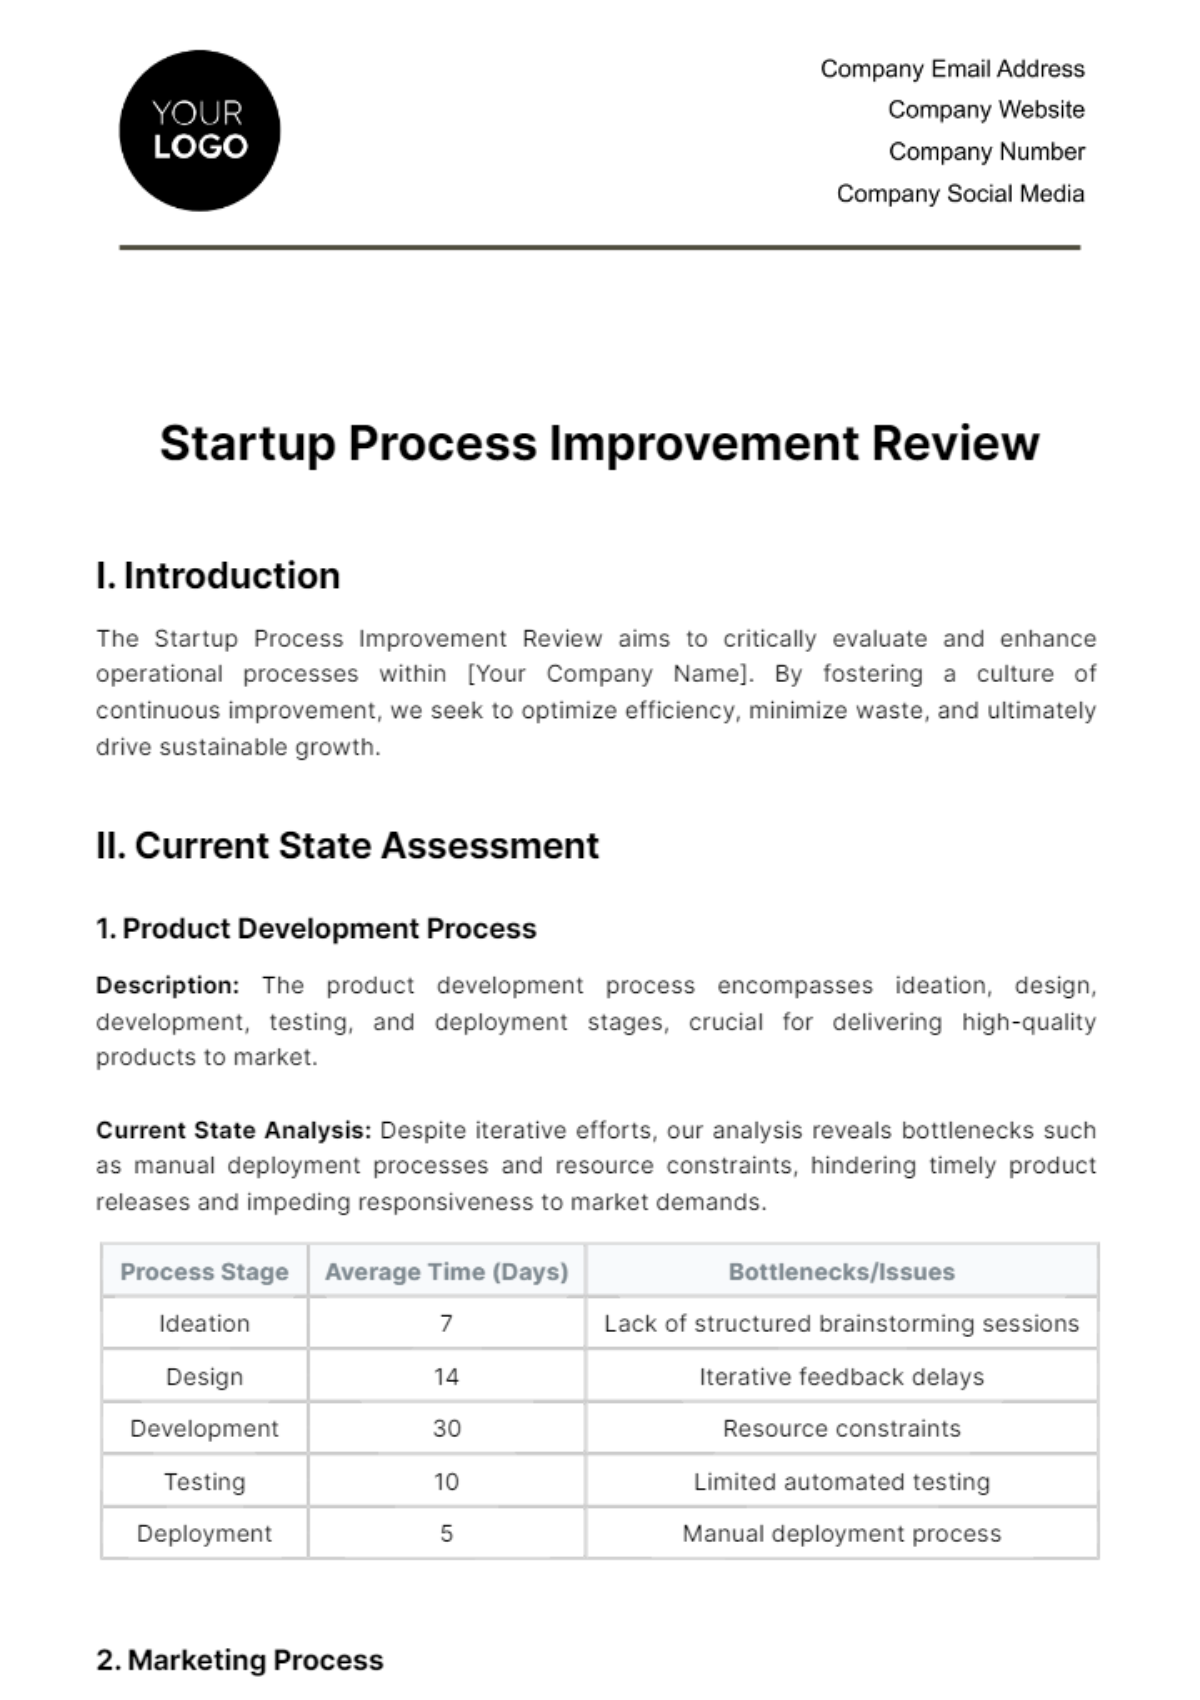 Startup Process Improvement Review Template